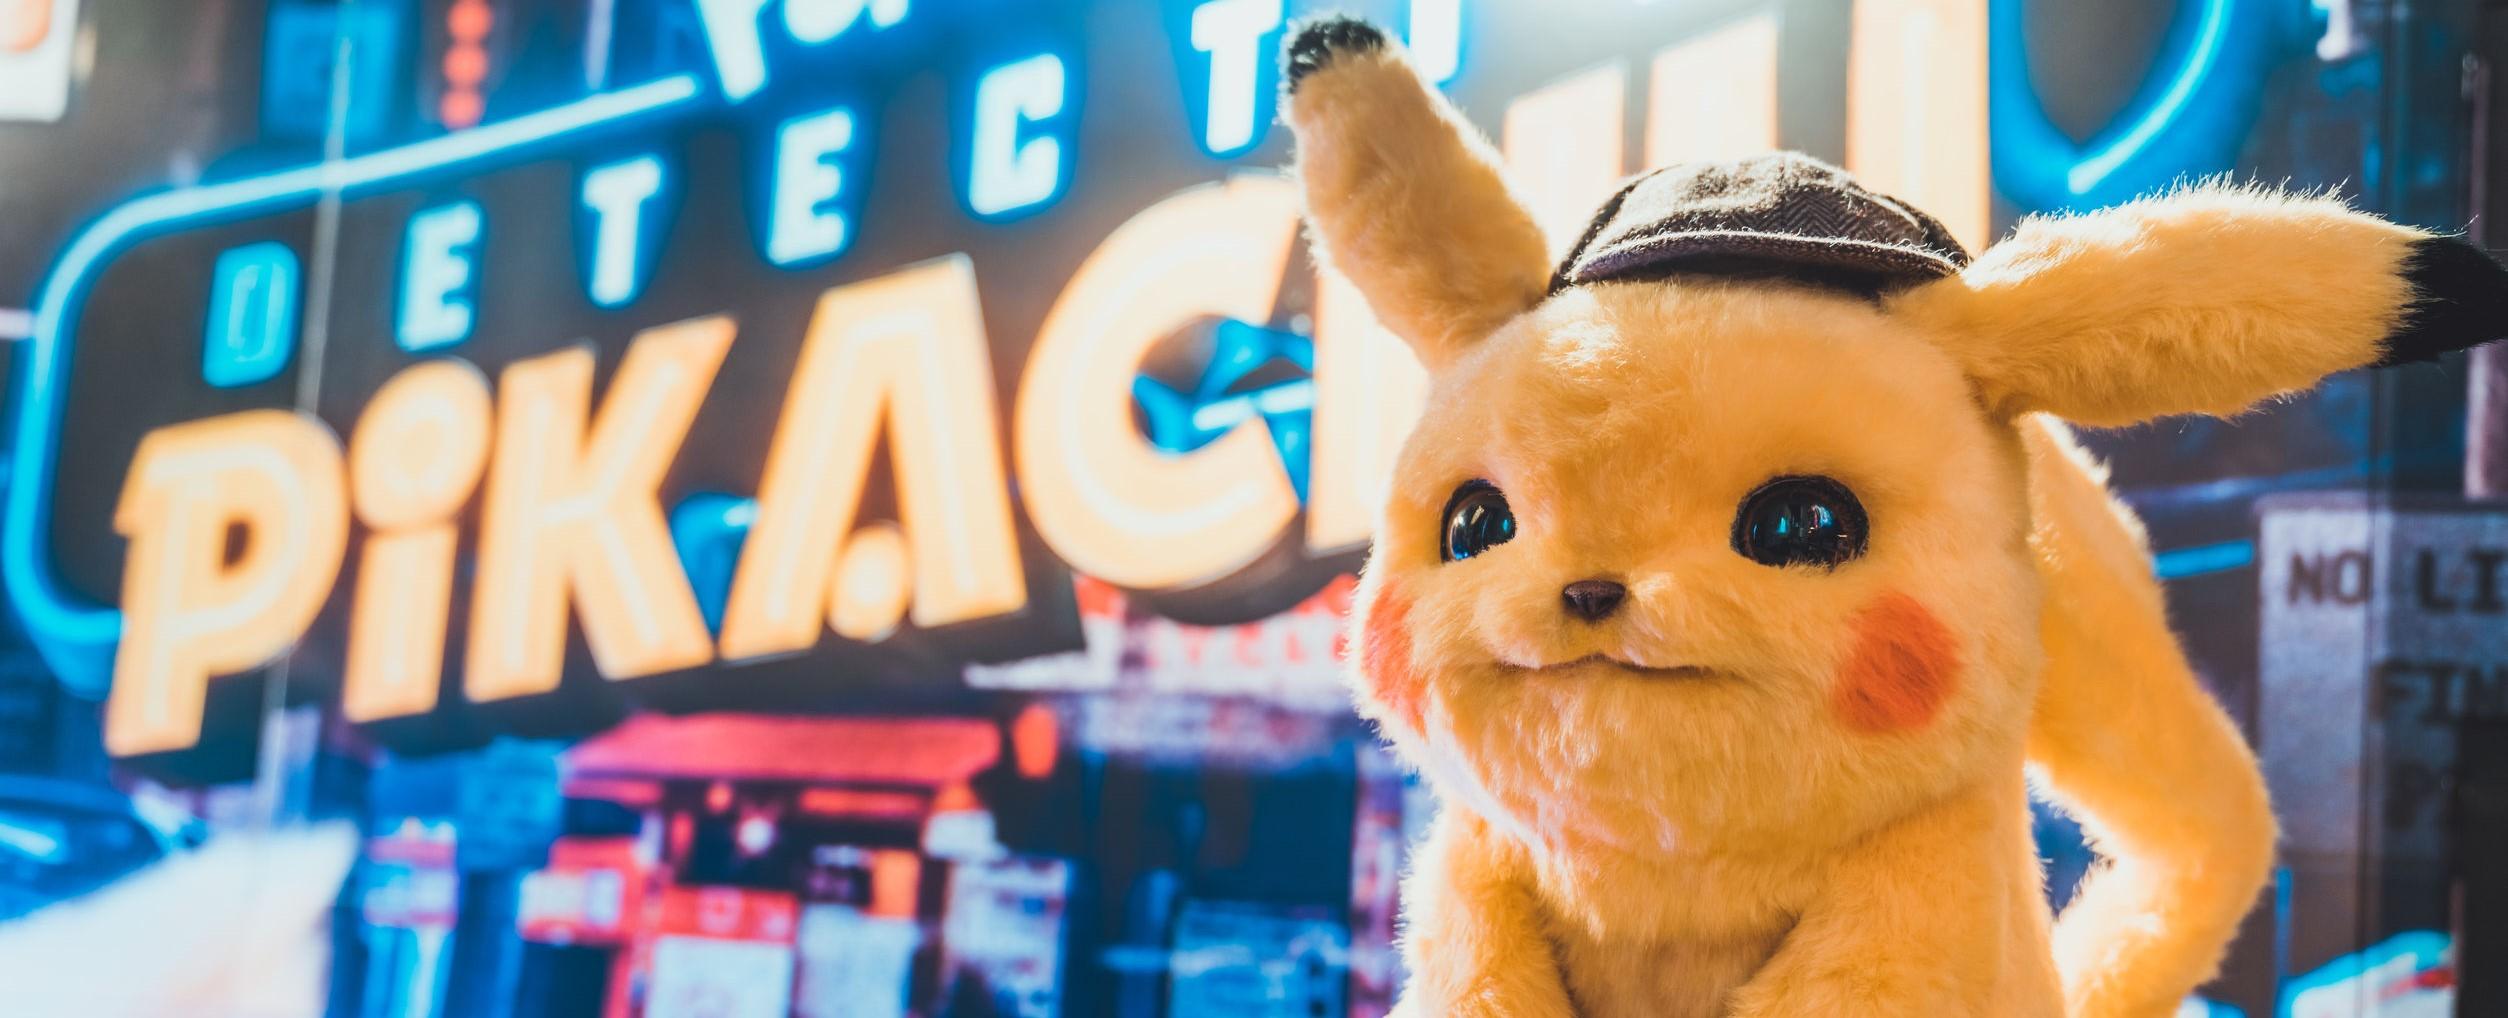 a picture of Detective Pikachu